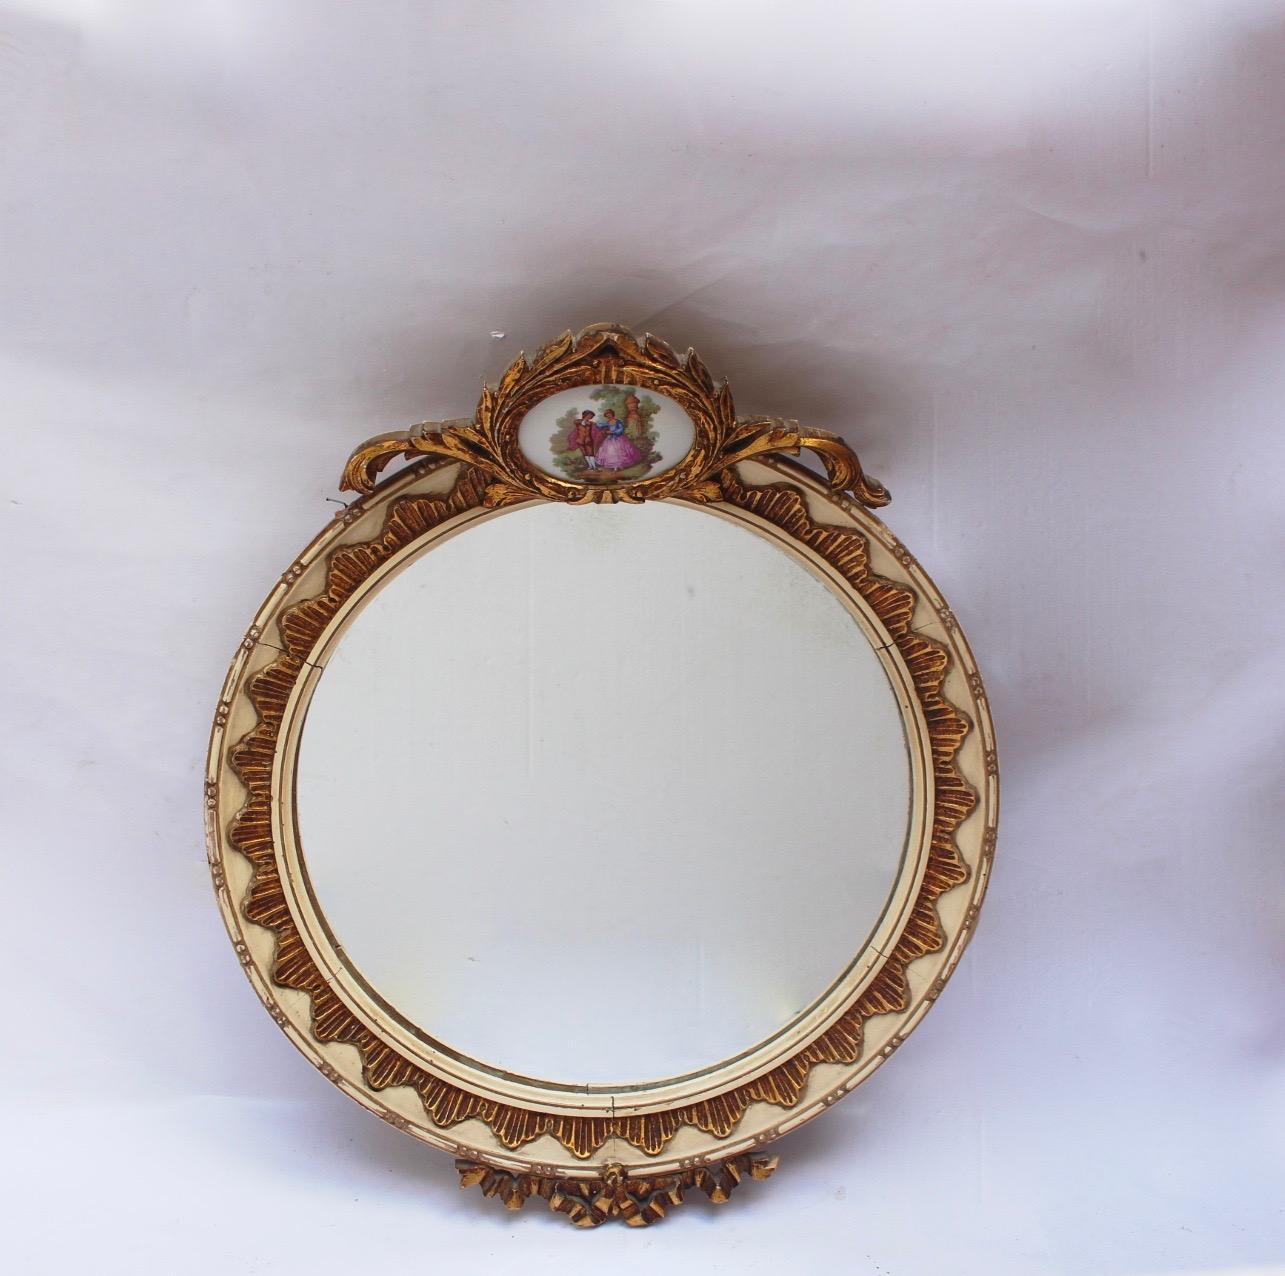 Polychromed Midcentury Neoclassical Revival Round Wood and Ceramic White Wall Mirror, 1950s For Sale